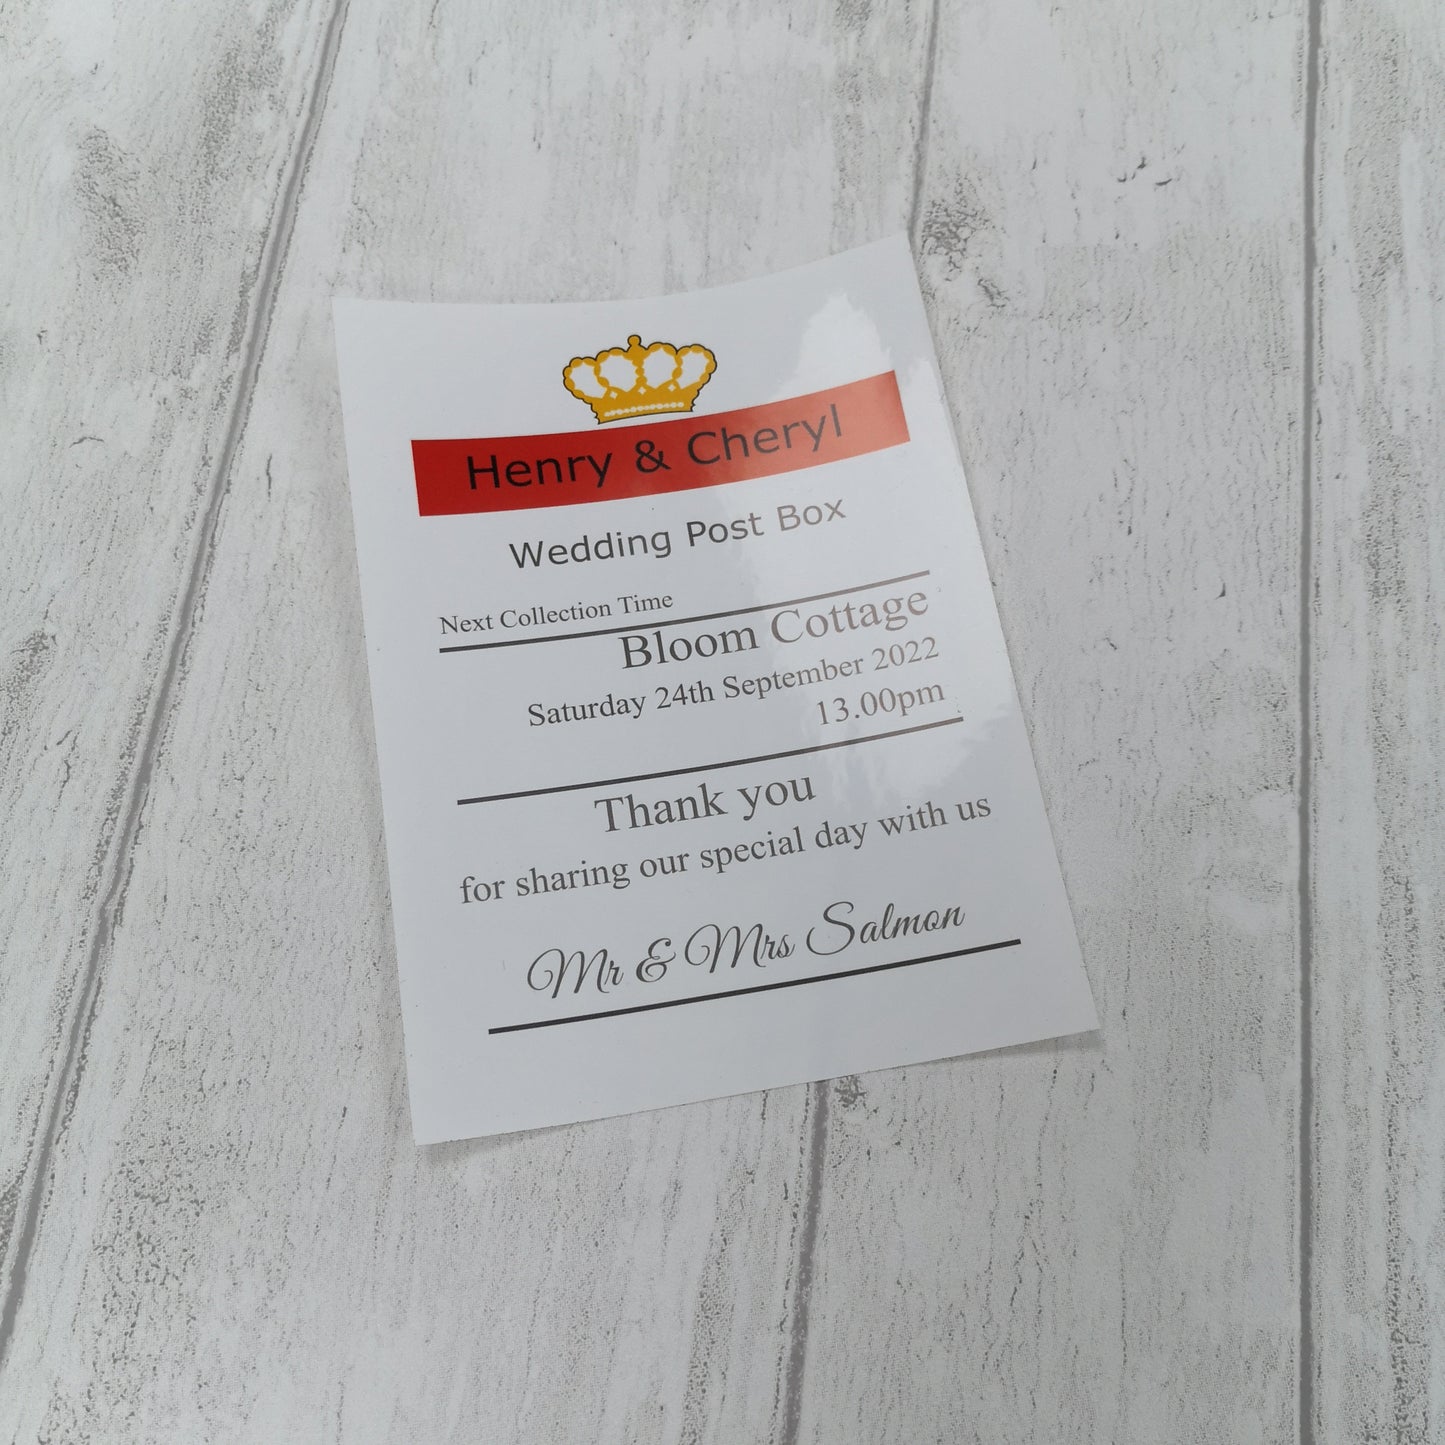 Royal Mail Event Post Box Sign,  Personalised for any occasion, Wedding Post Box Decal